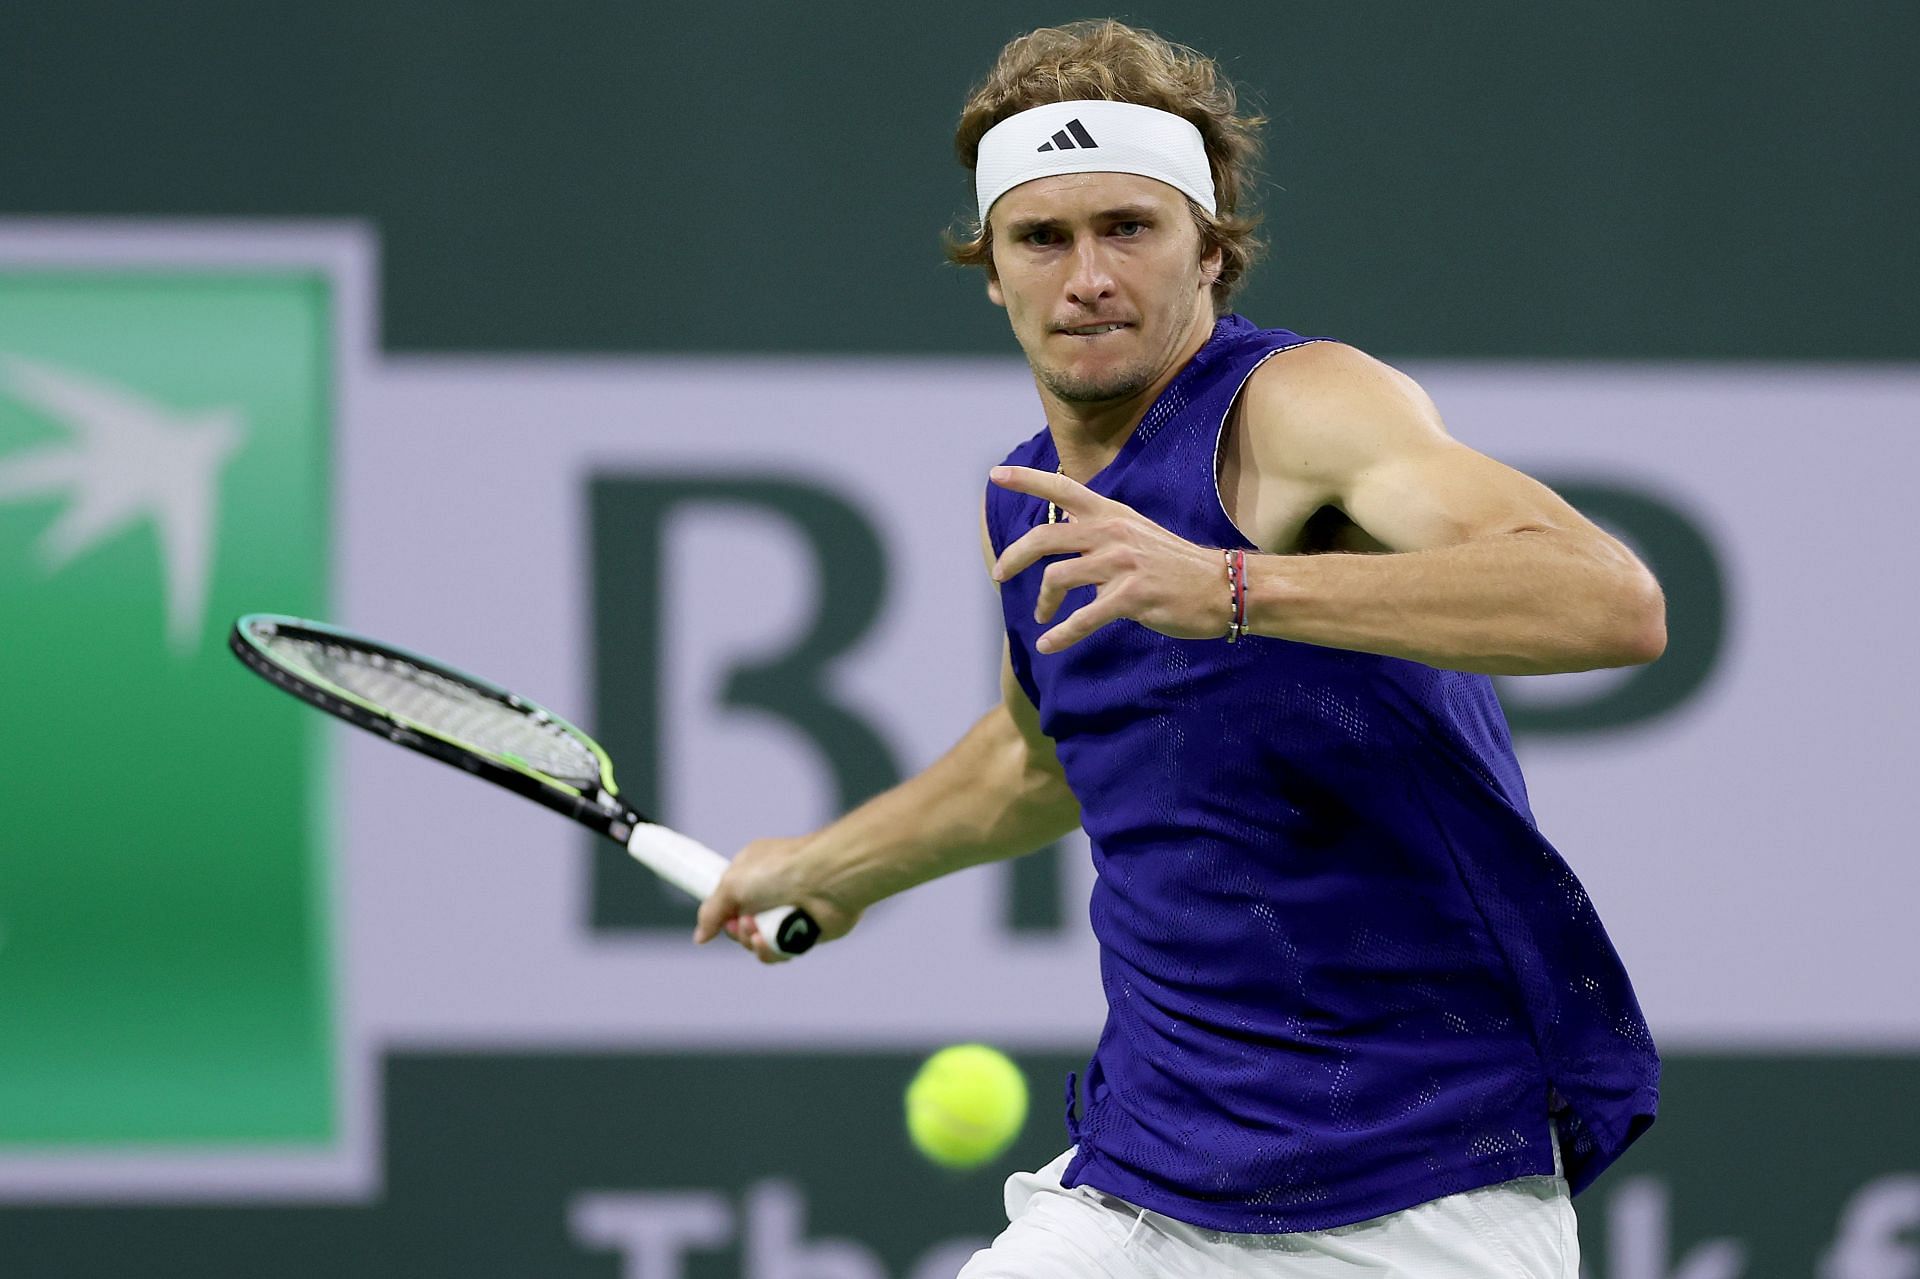 Zverev is looking for his first title of the year.